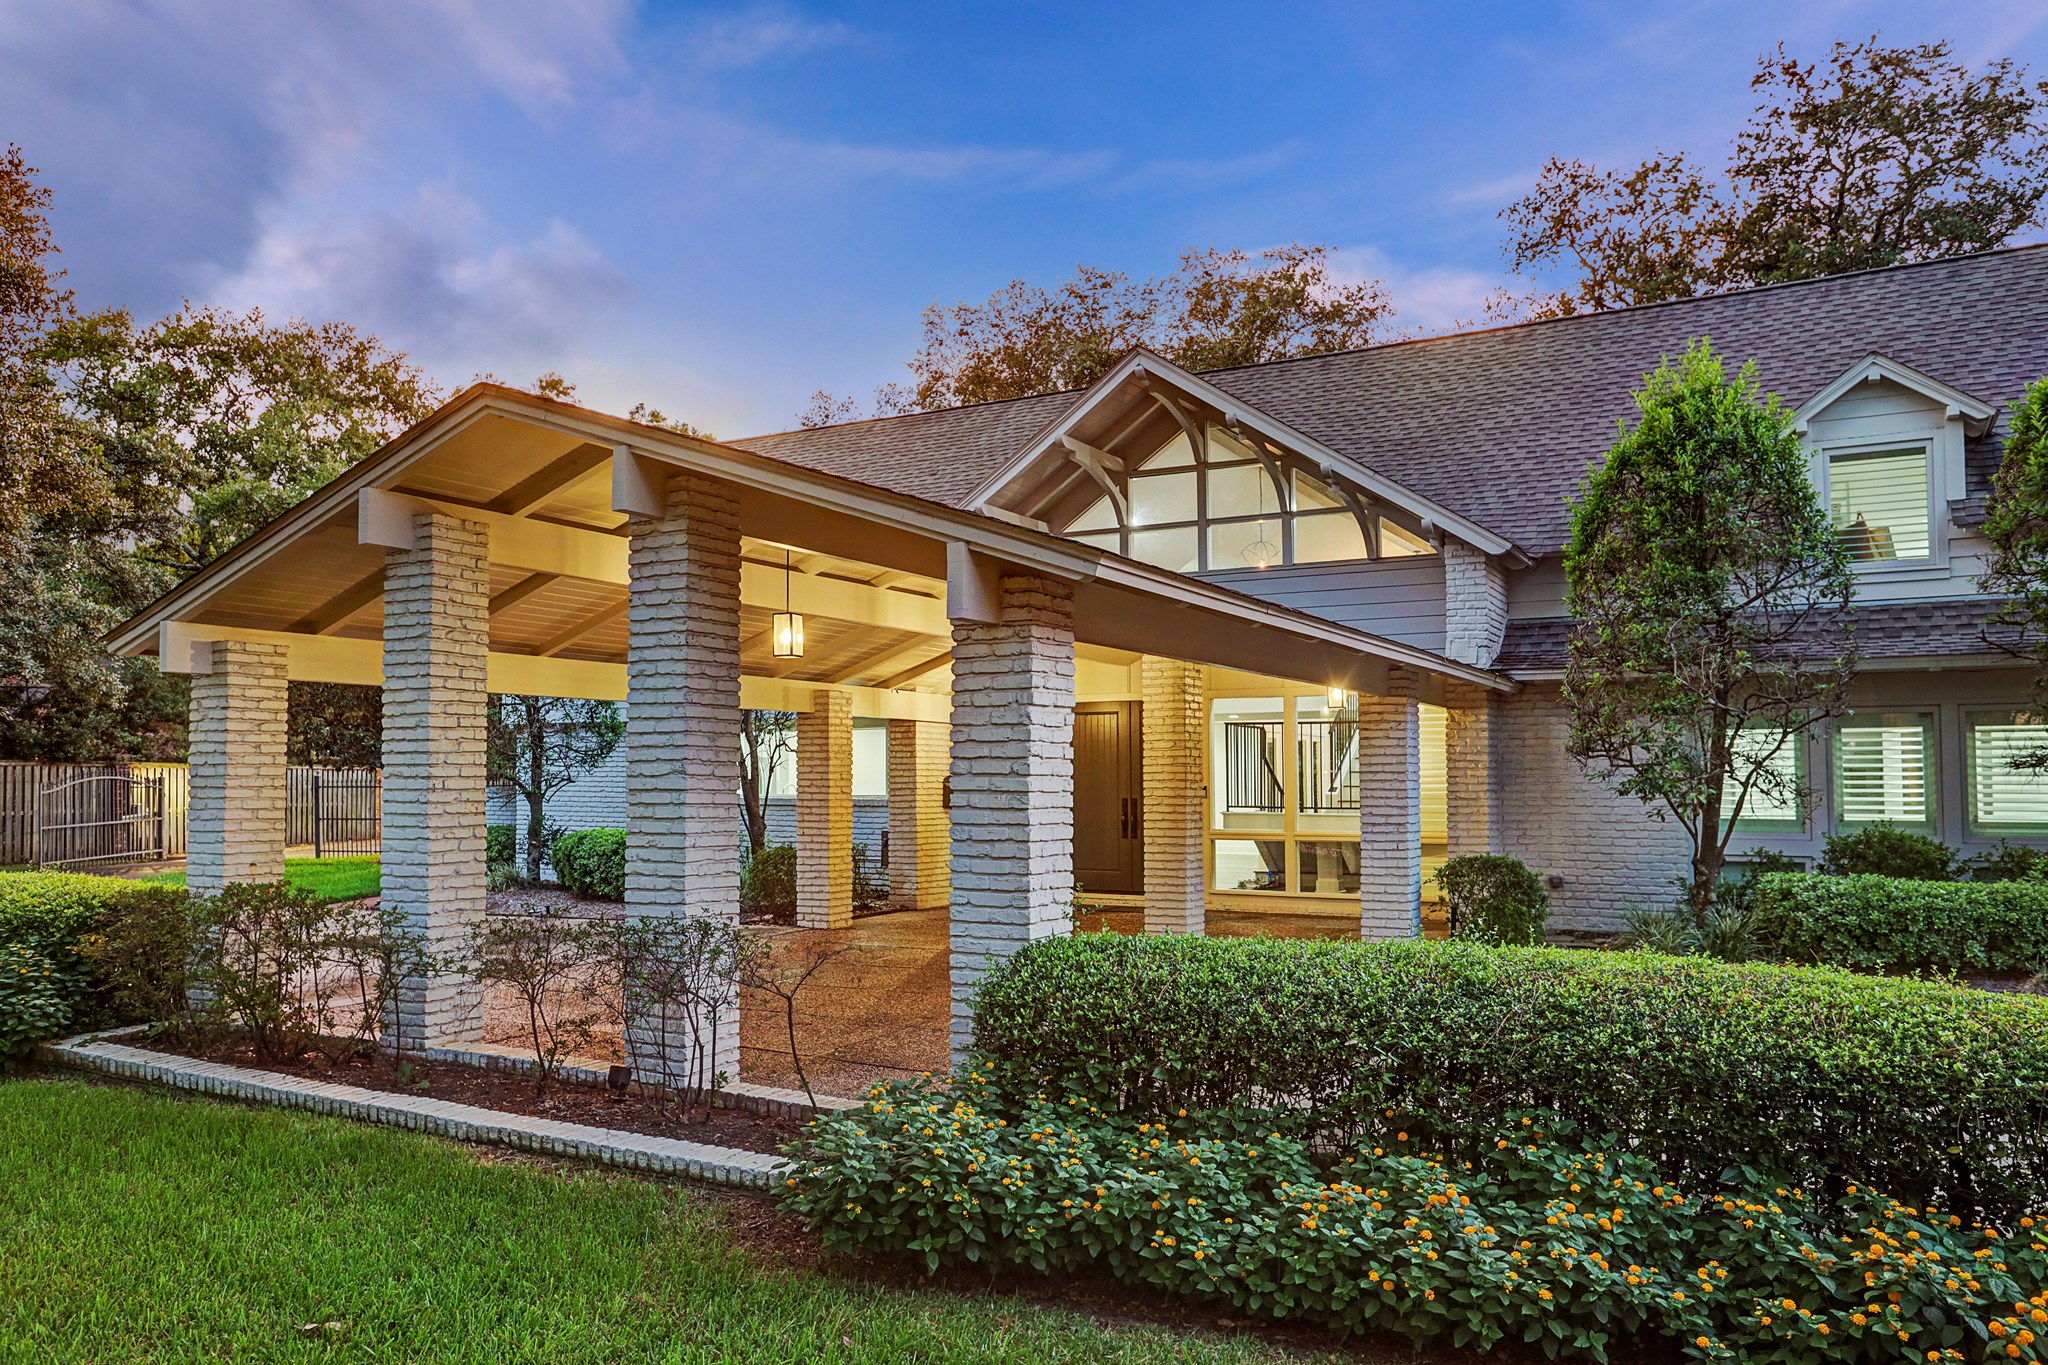 Live in one of Houston's premier neighborhoods and enjoy coming home to this beauty located on a lot just shy of an acre. The surprise is inside!